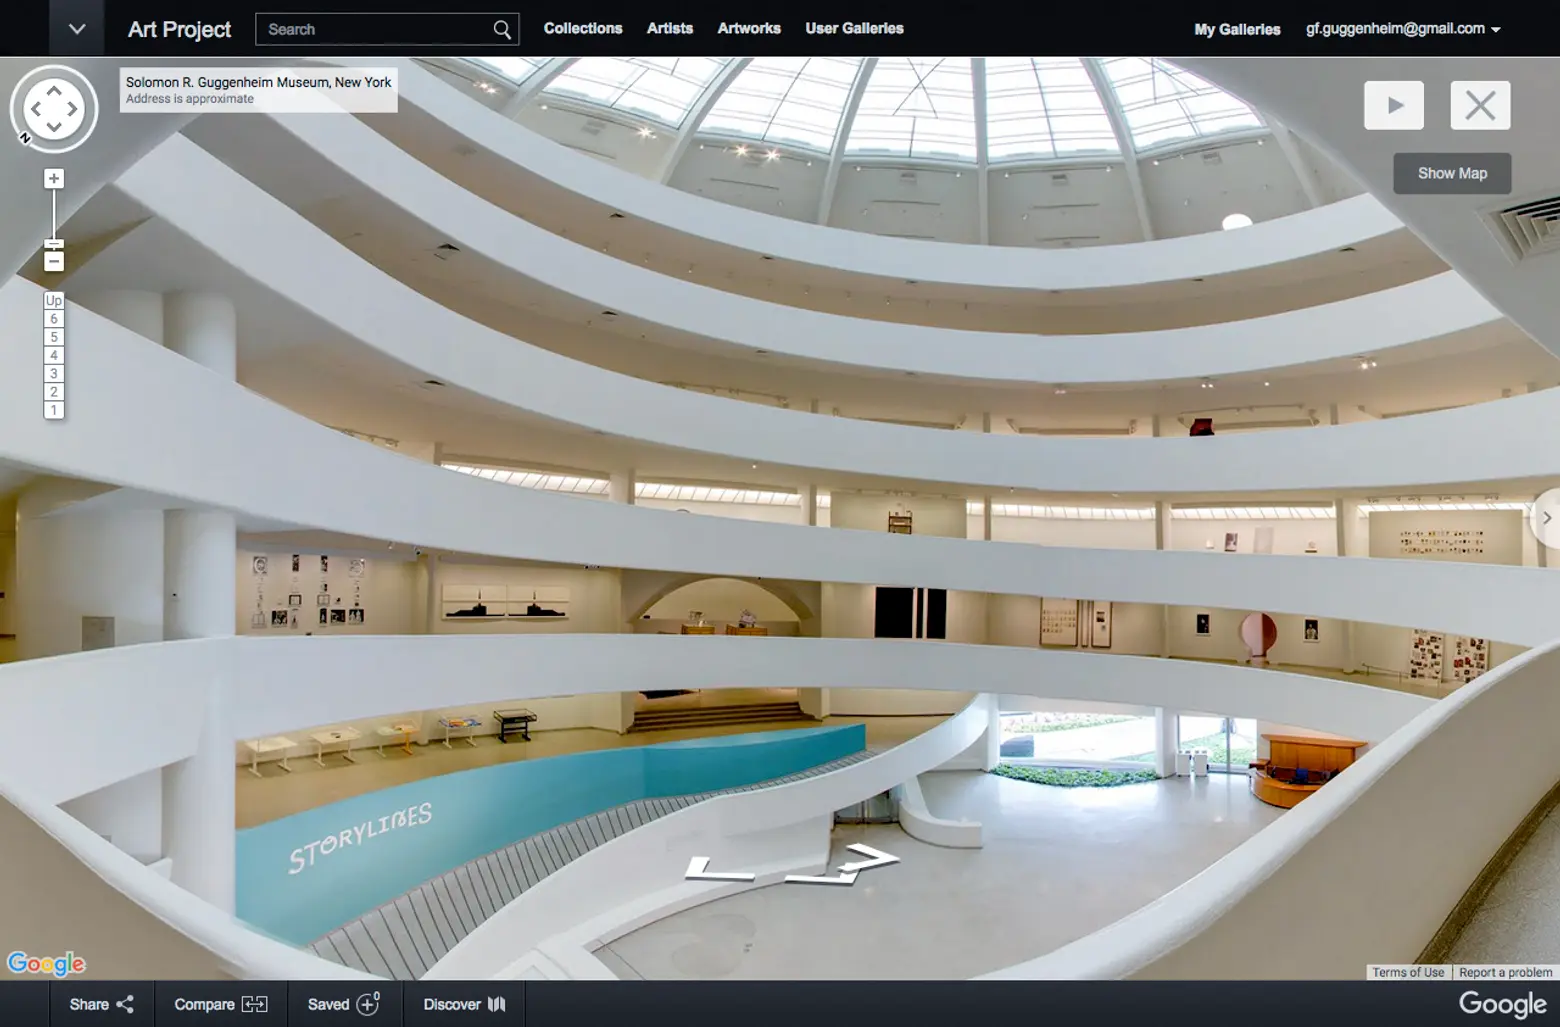 Tour the Guggenheim and Its New Exhibit Through Google Street View